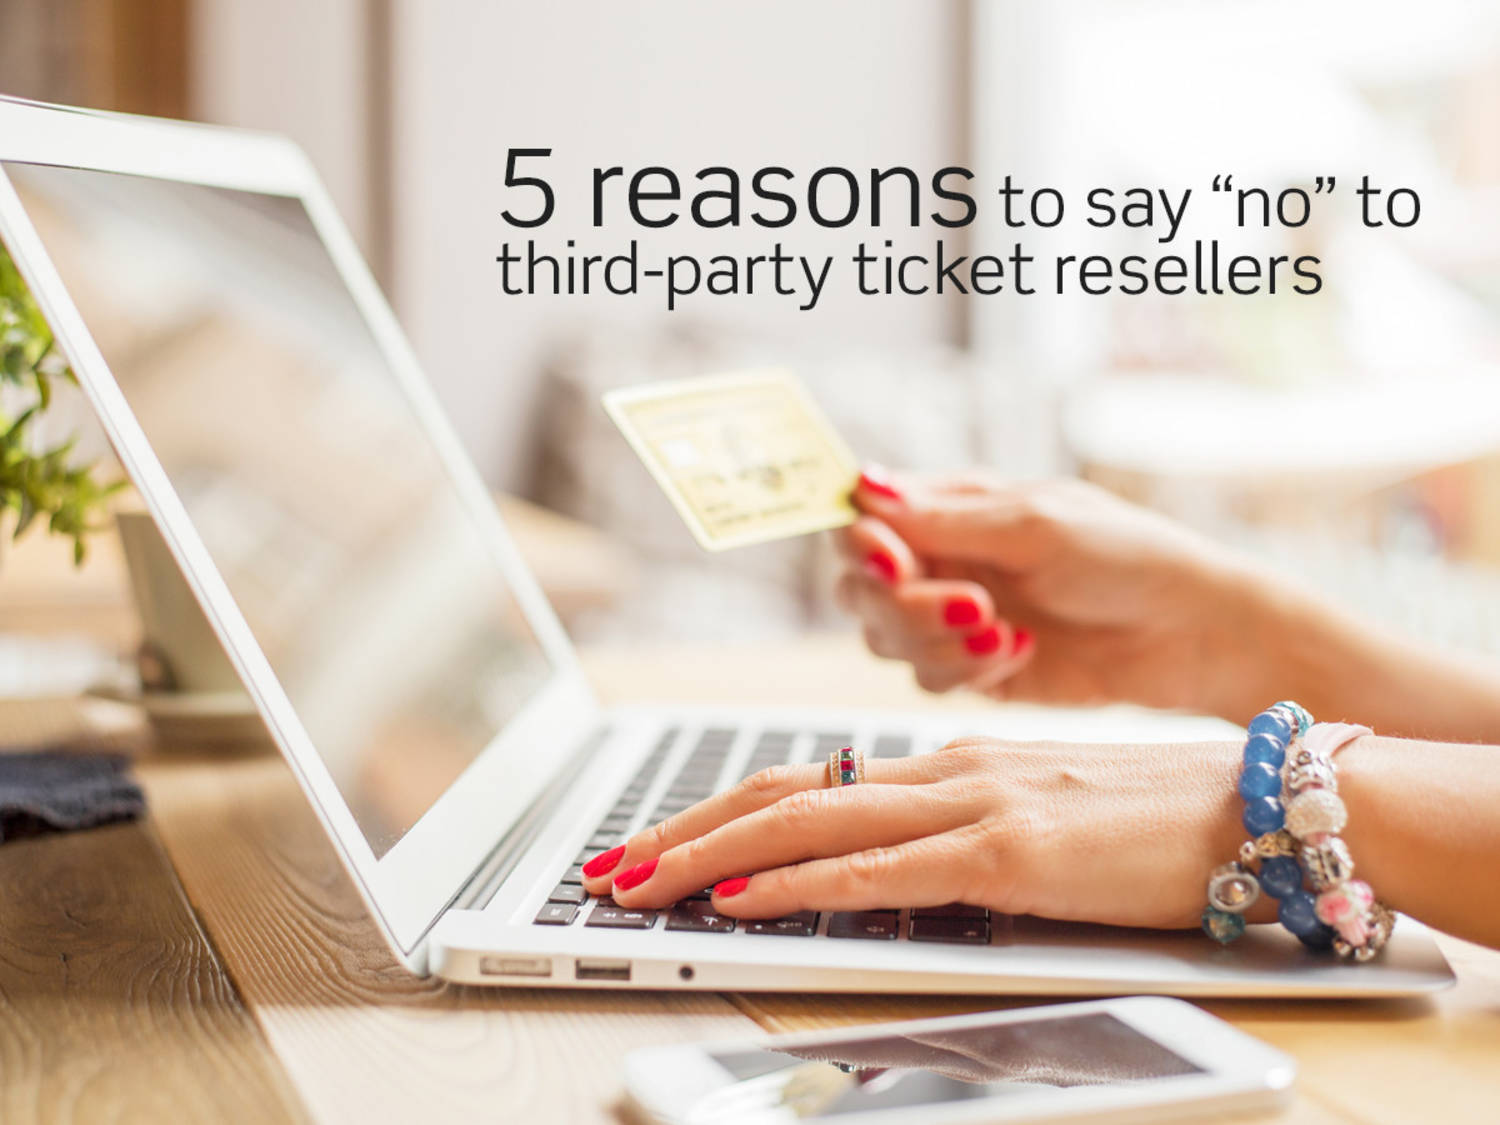 5 reasons to say “no” to third-party ticket resellers